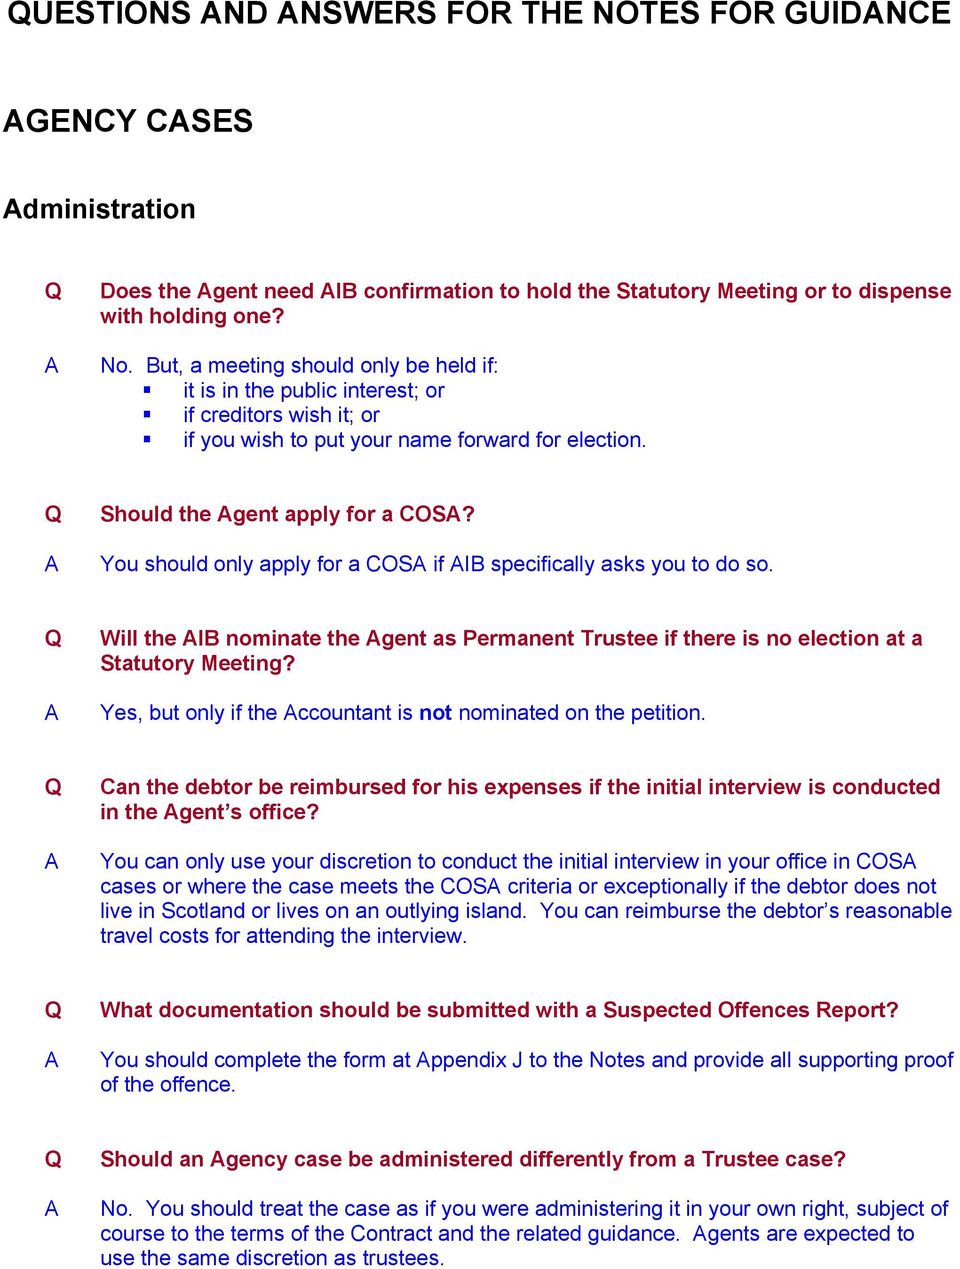 You should only apply for a COS if IB specifically asks you to do so. Will the IB nominate the gent as Permanent Trustee if there is no election at a Statutory Meeting?